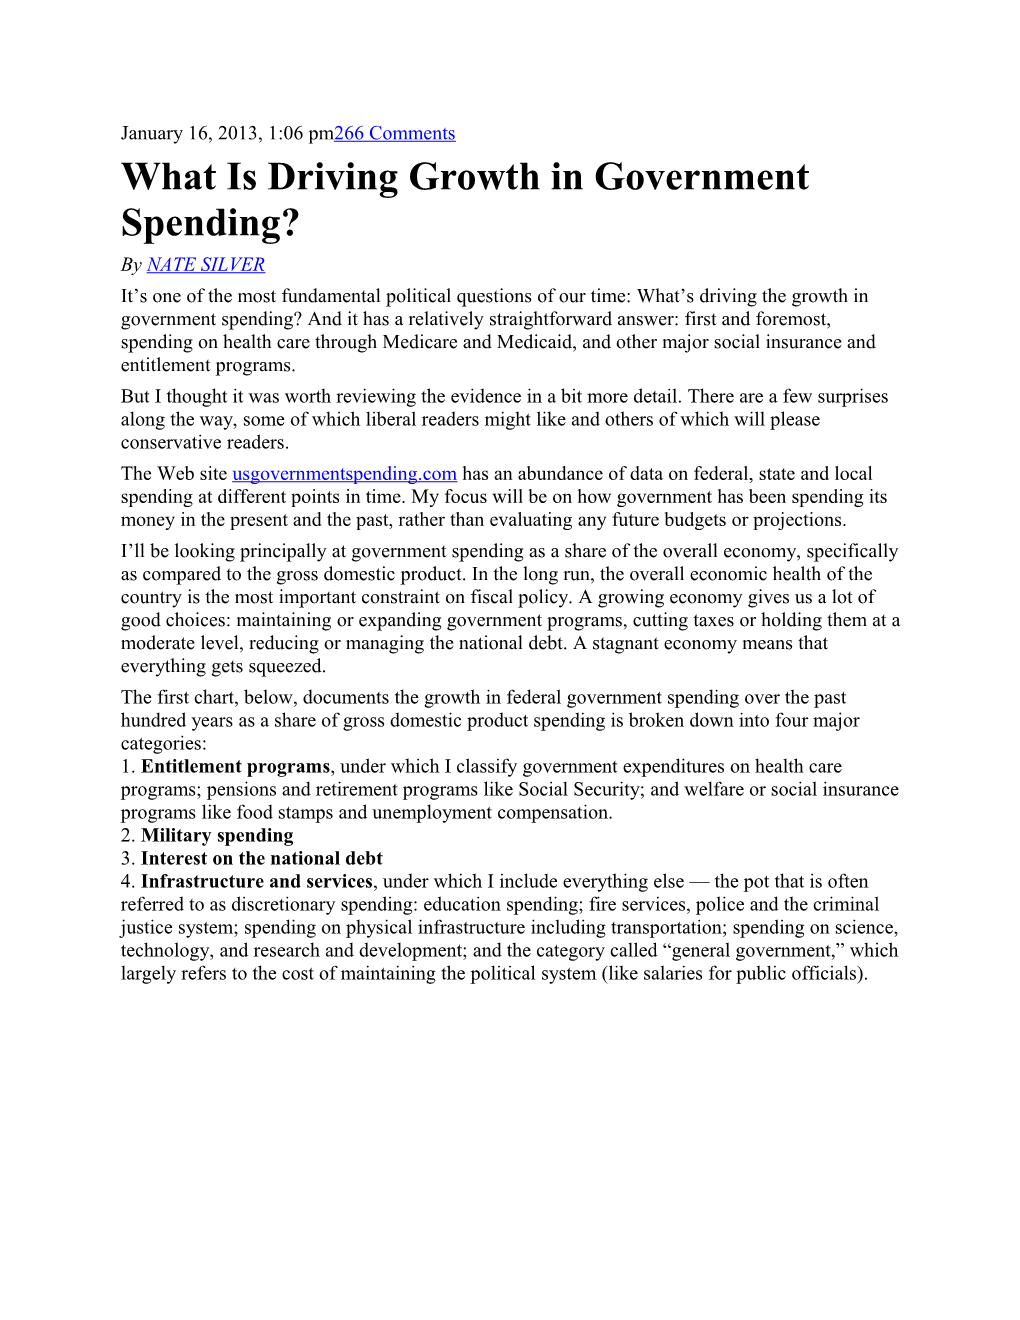 What Is Driving Growth in Government Spending?